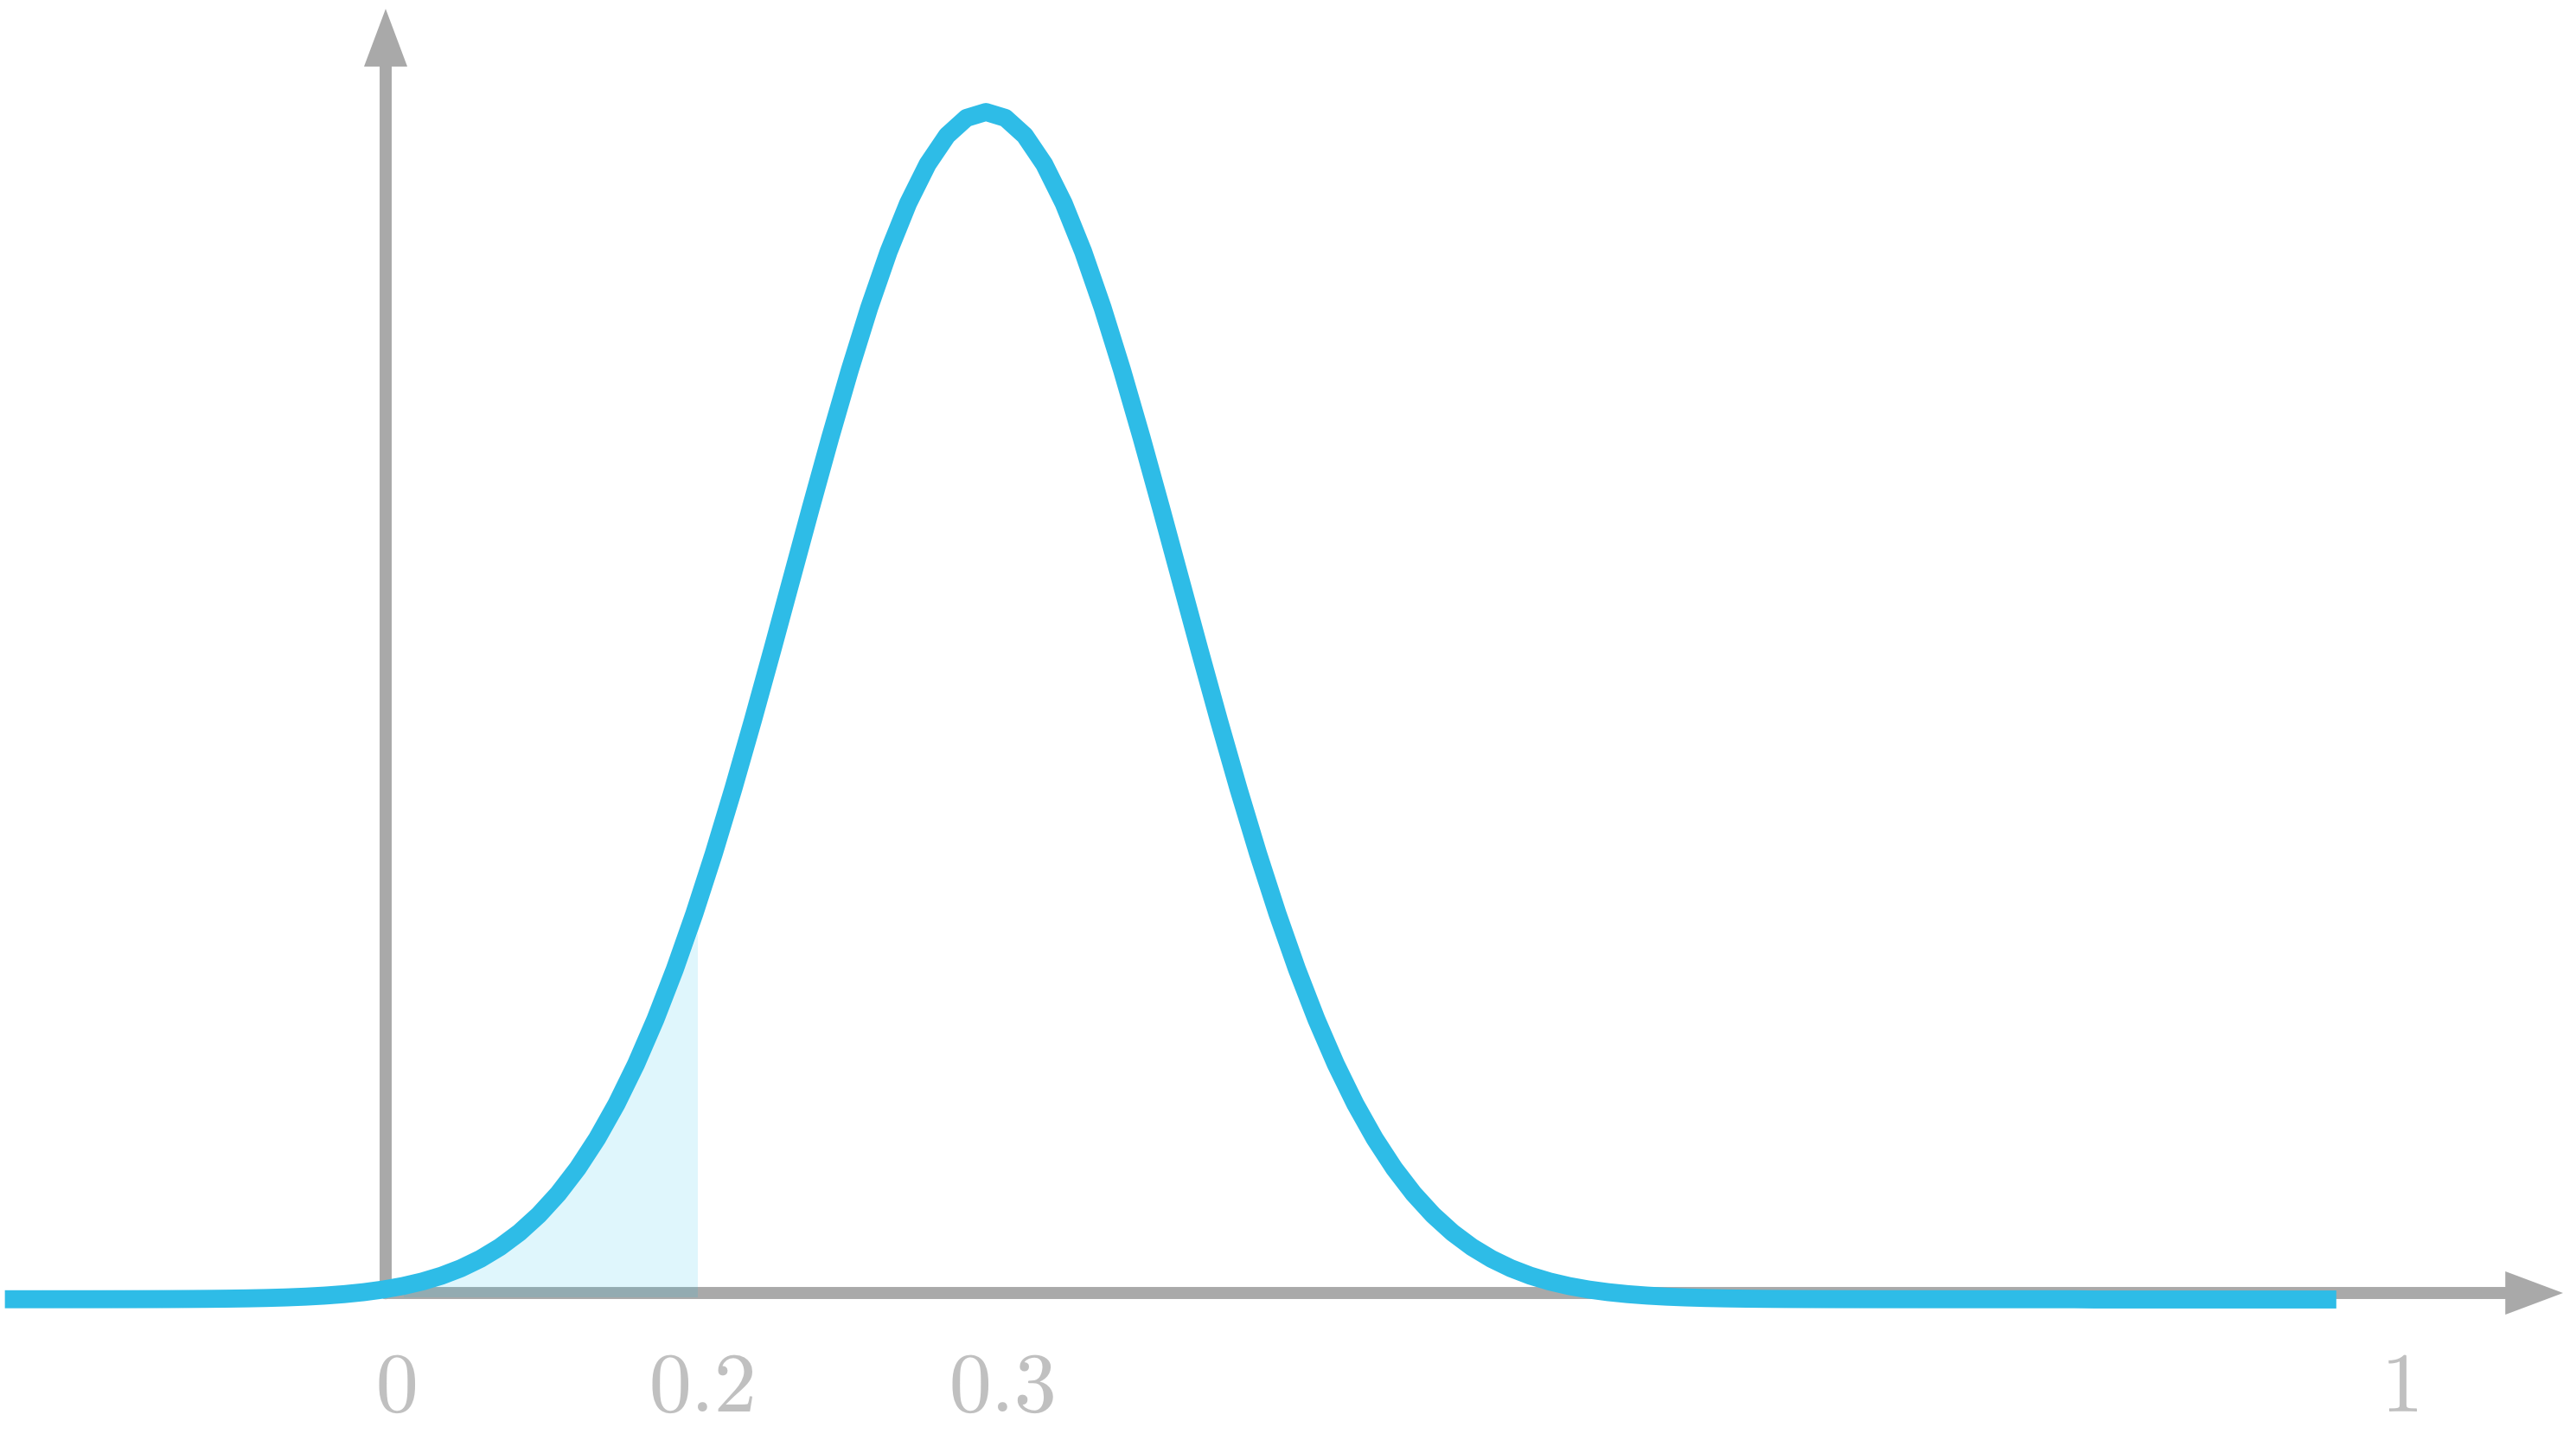 Figure 5: The probability to draw a number between 0 and 0.2 is the highlighted area under the curve.